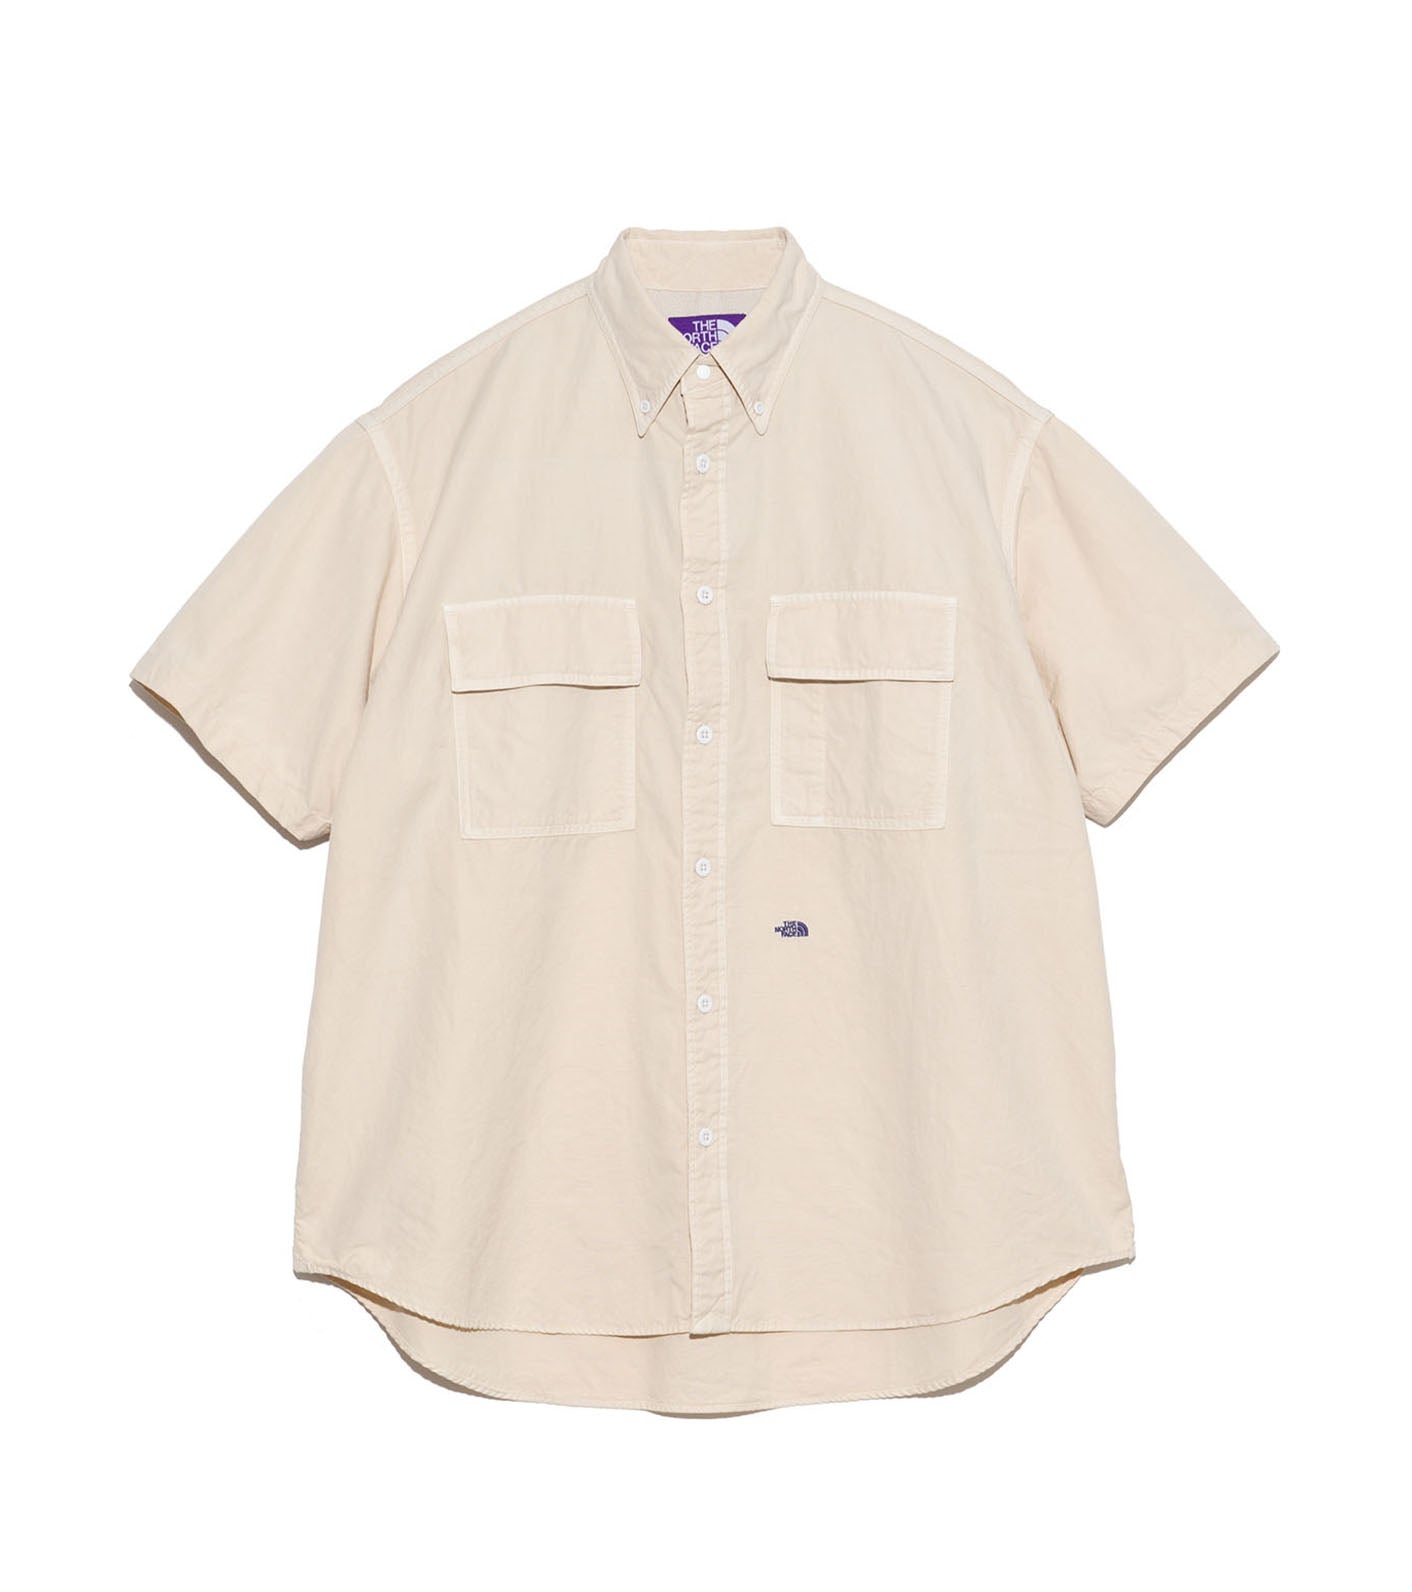 THE NORTH FACE PURPLE LABEL Button Down Field S/S Shirt